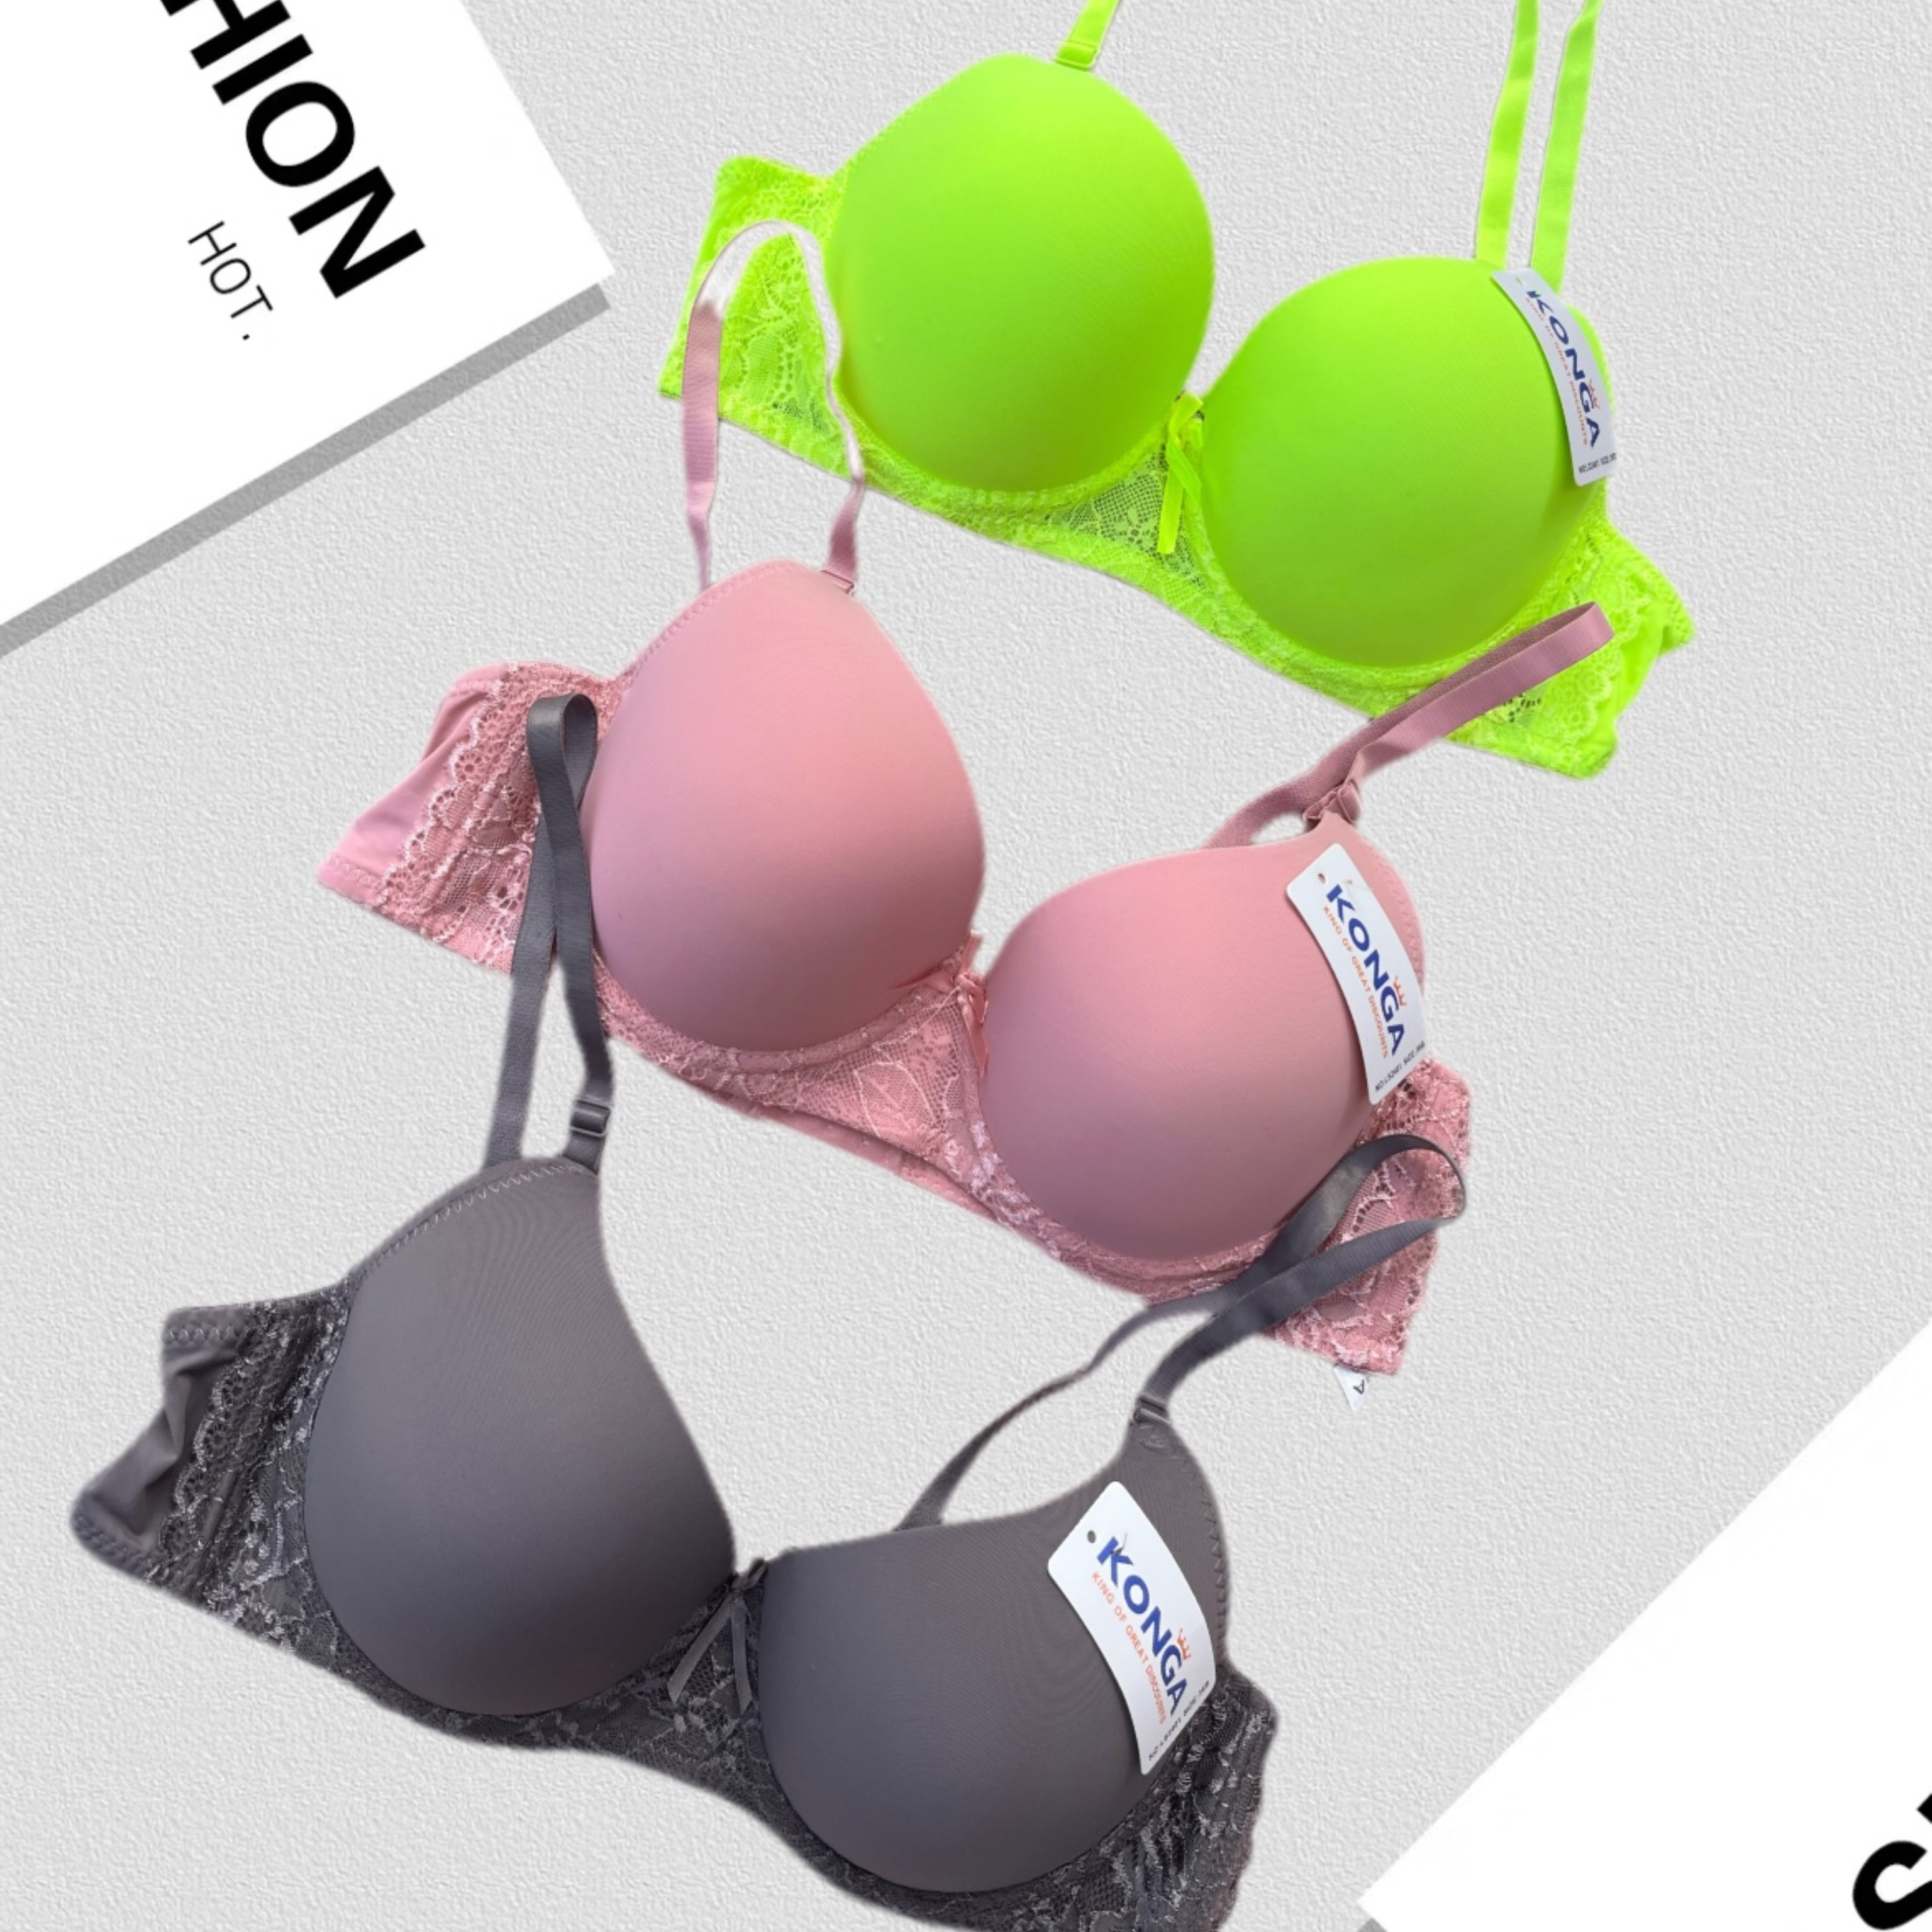 

01 6-pack Assorted Colors Ultra-soft Seamless Push-up Bras, Comfortable Everyday Supportive T-shirt Bras For Women, Elegant Style Versatile Value Set With Breathable Cups